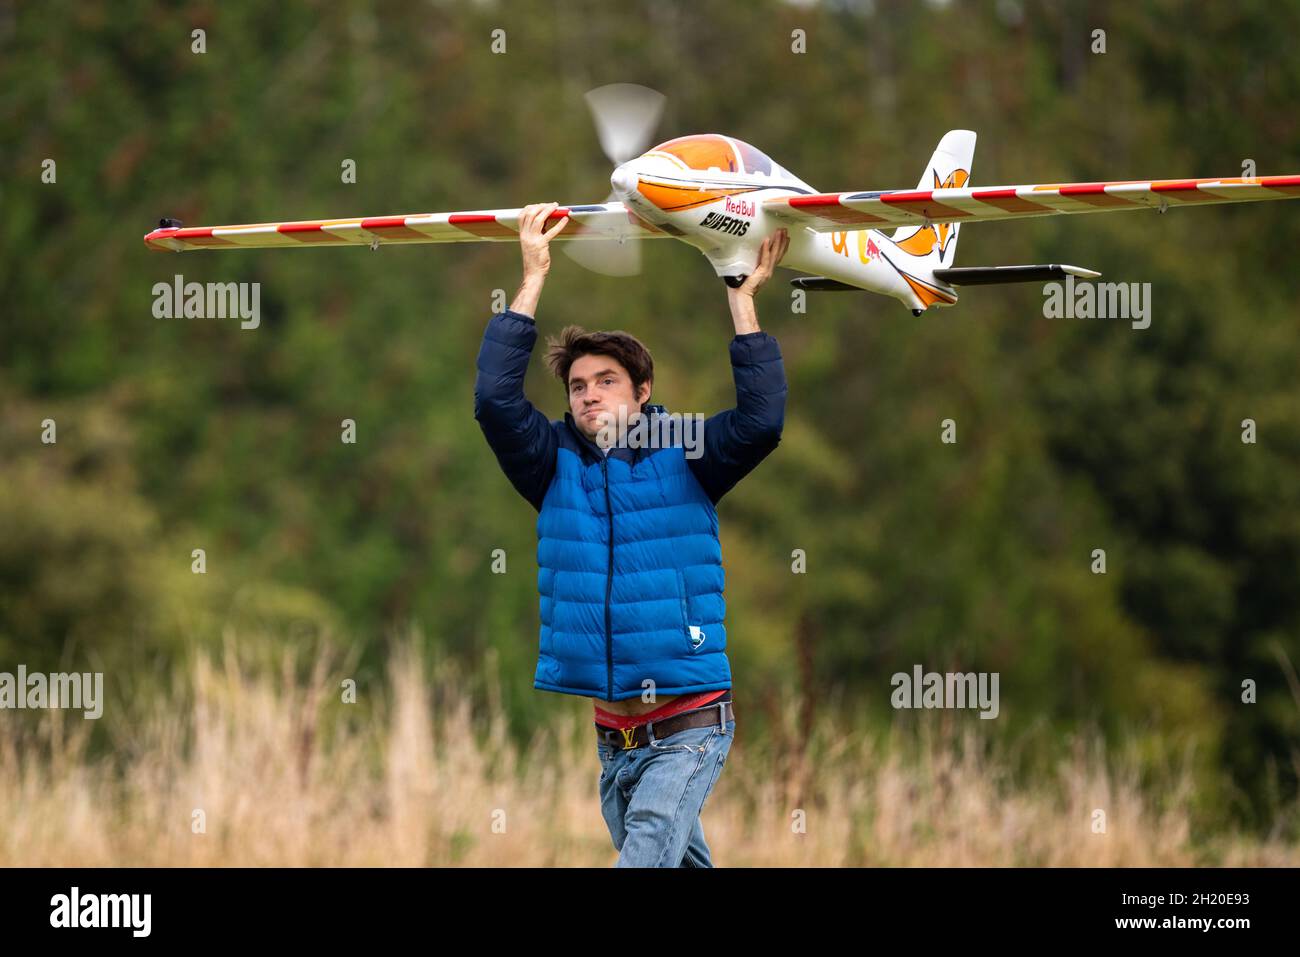 A large motorised radio-control glider is launched by hand at the Basingstoke Model Aero Club, Basingstoke, UK Stock Photo